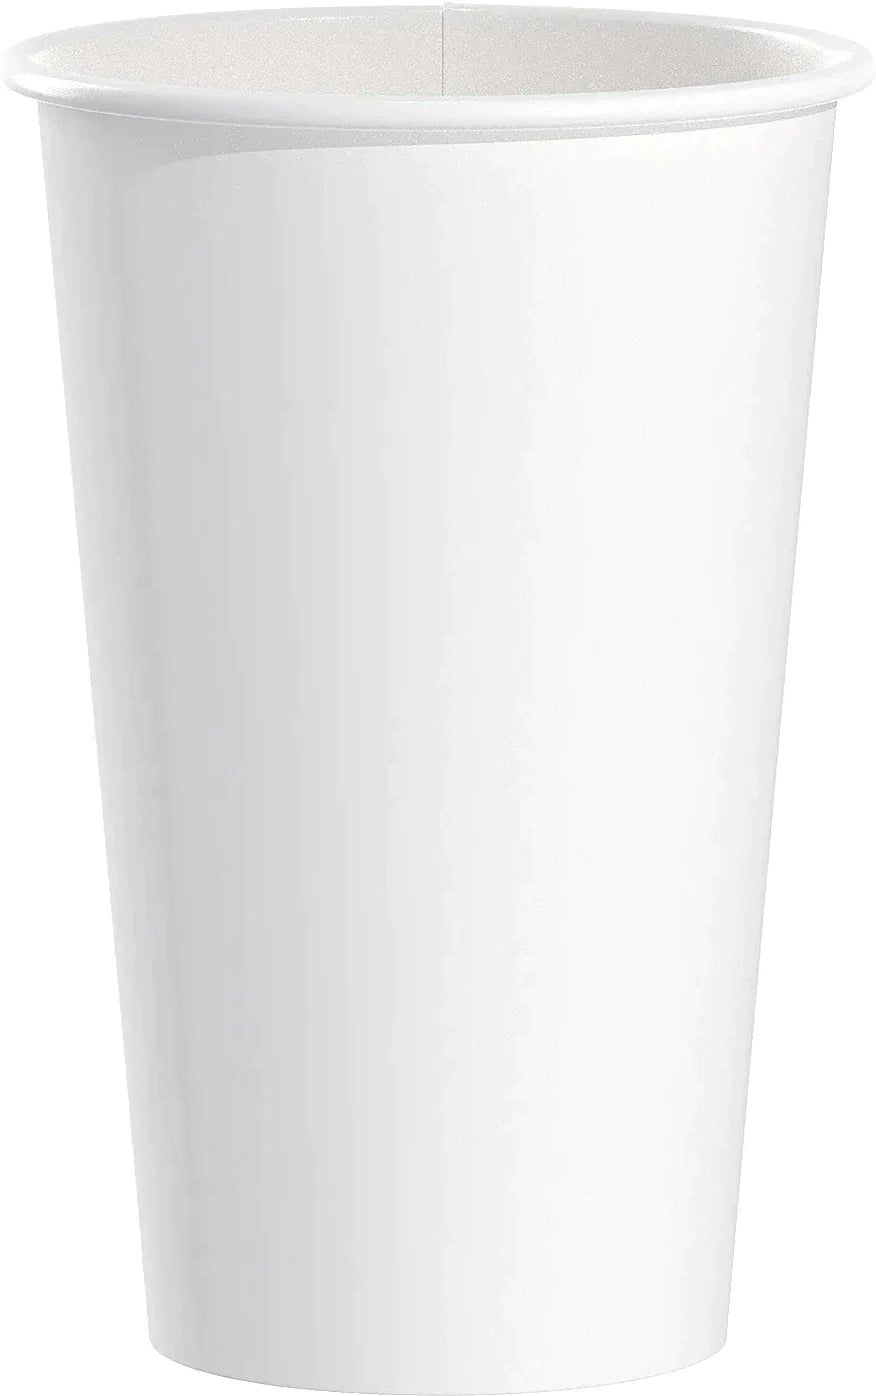 Dart Container - 16 Oz SSP Paper White Hot Cup, 1000/Cs - 316W-2050